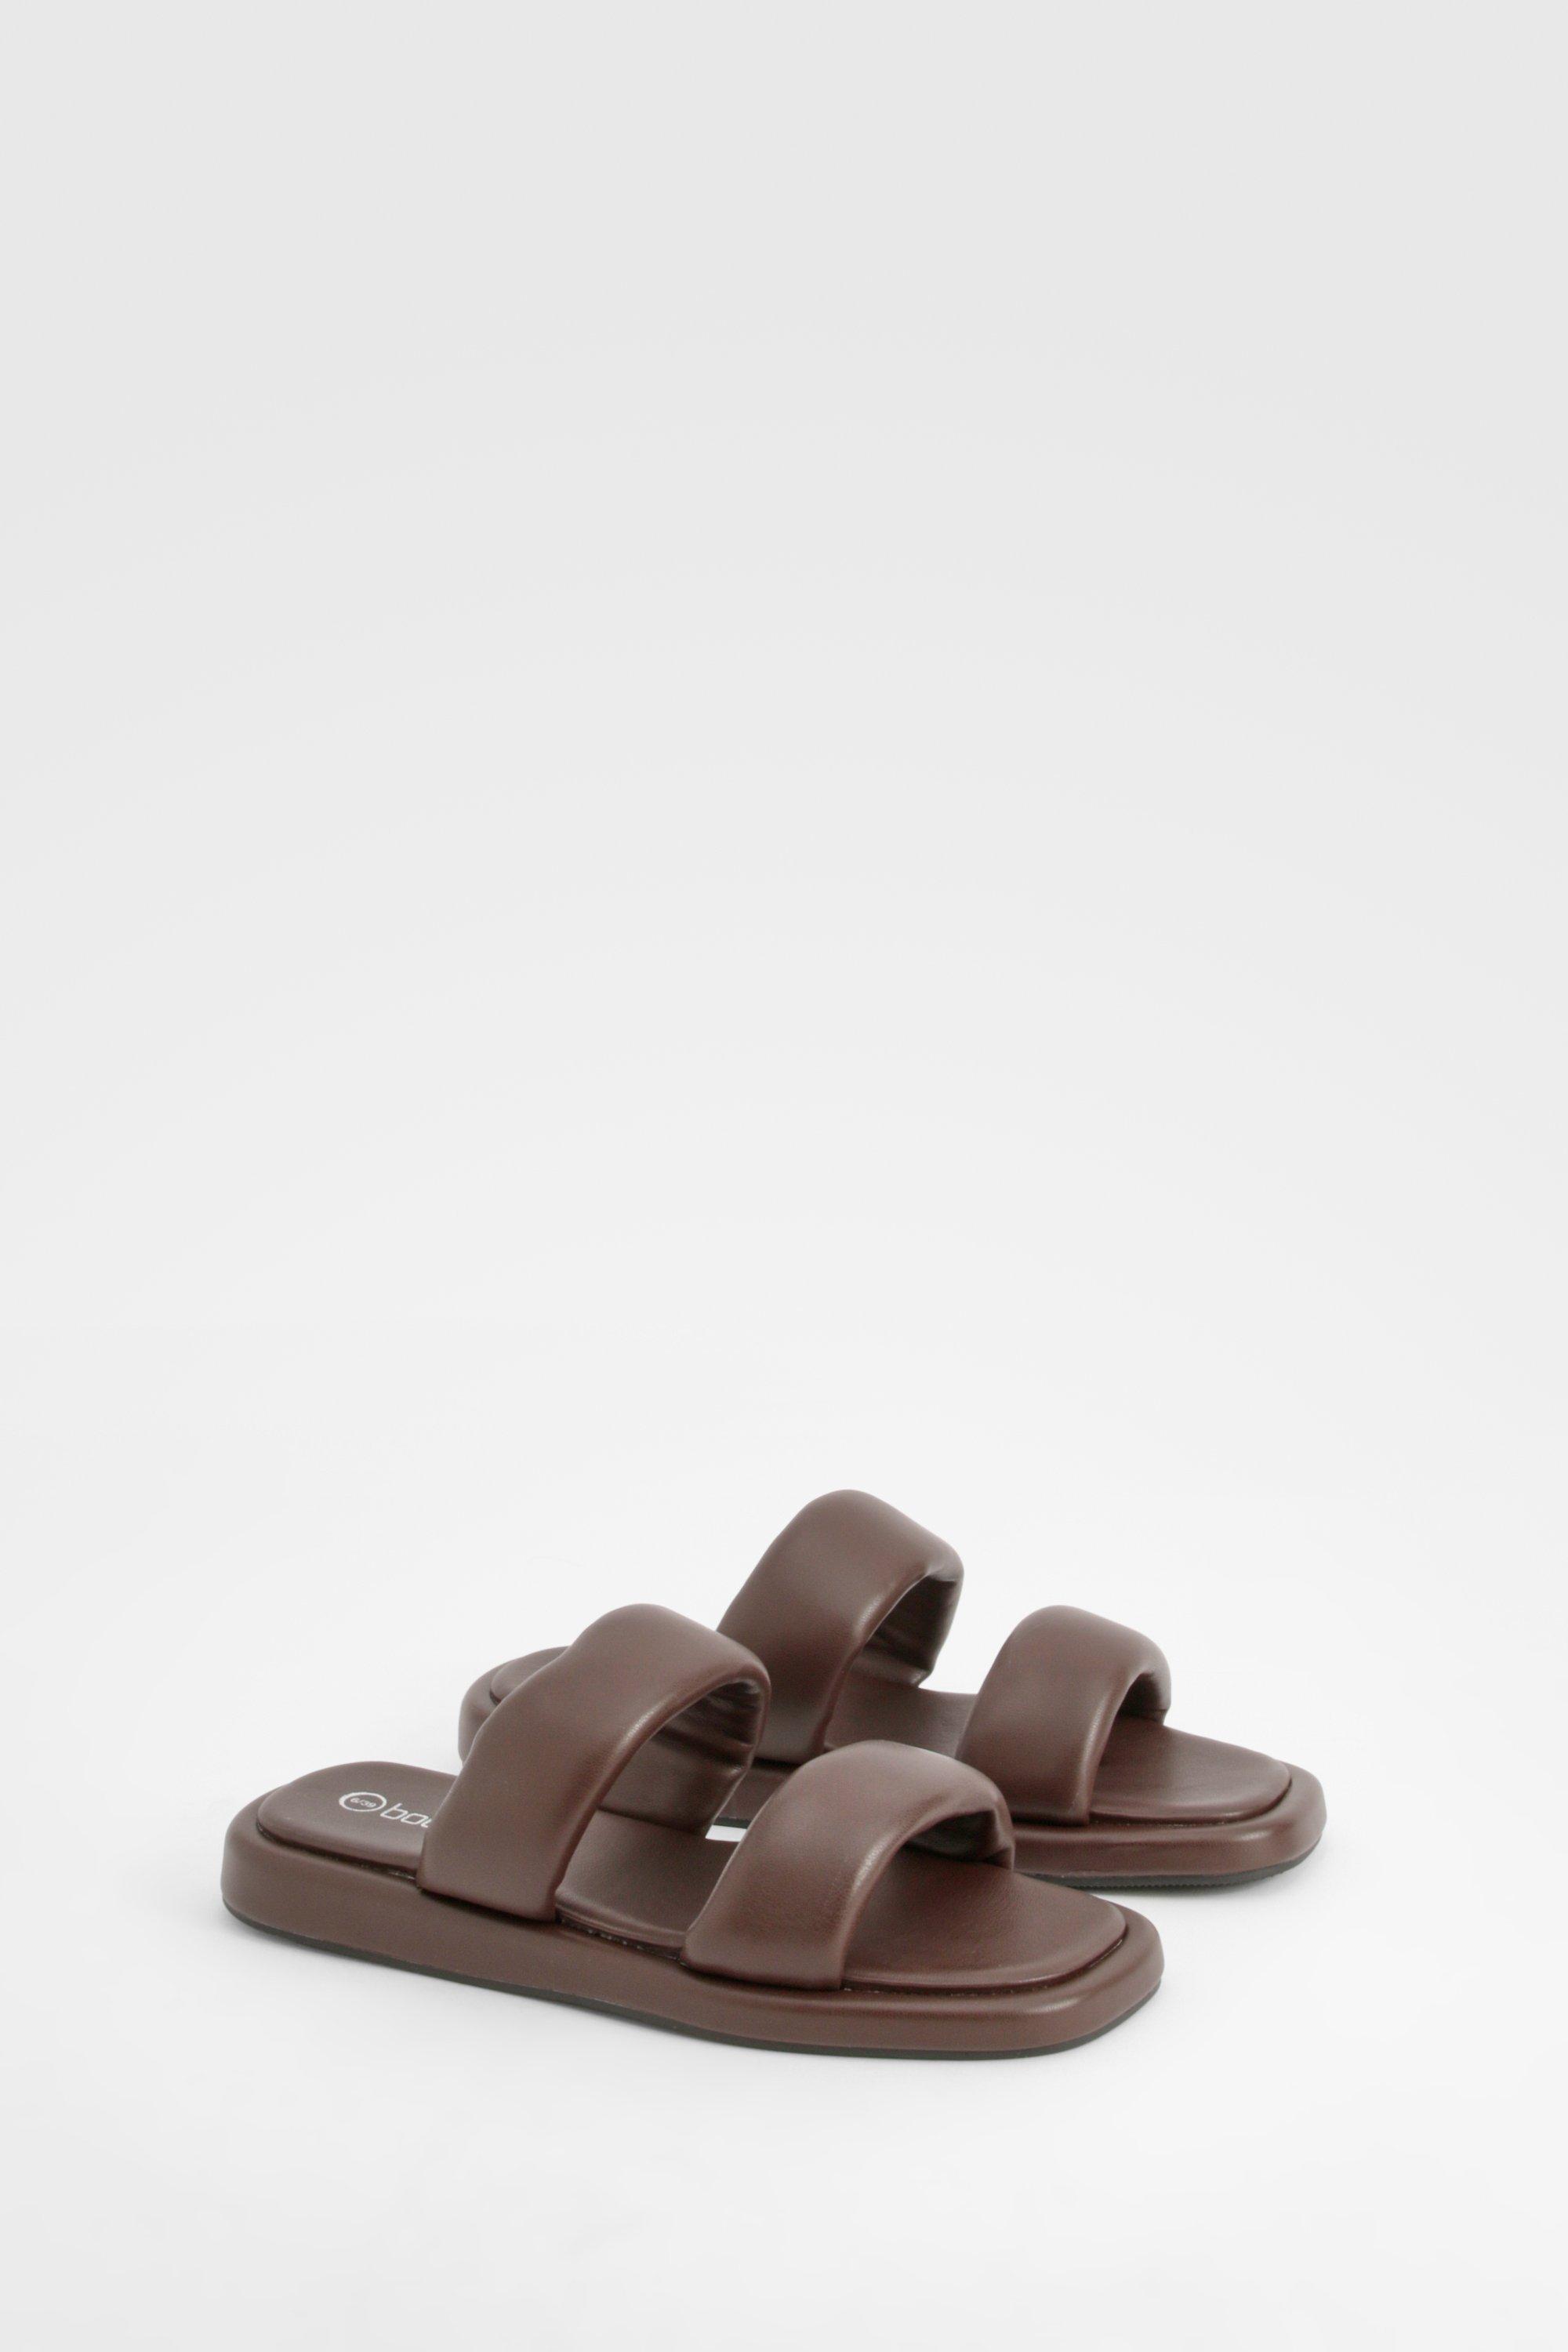 Image of Padded Minimal Double Strap Sliders, Brown